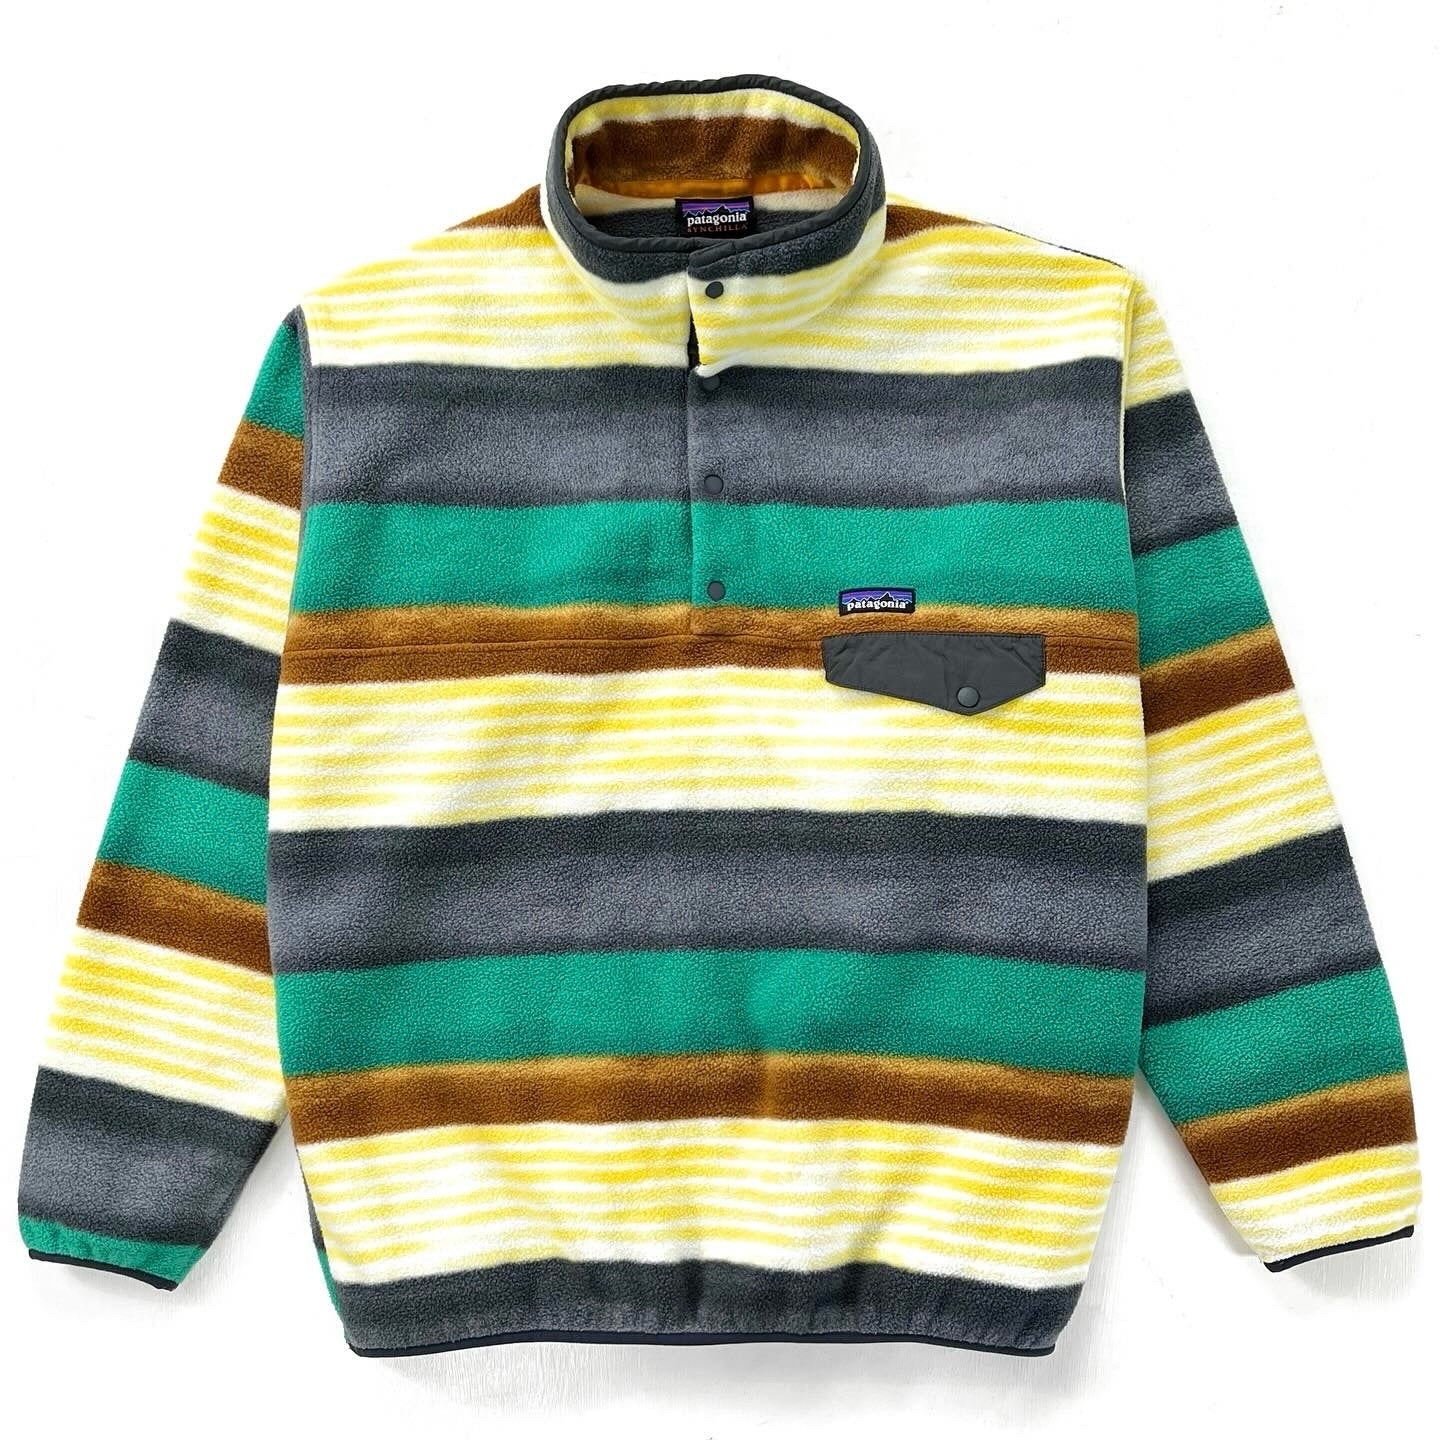 2016 Patagonia Printed Synchilla Snap-T, Painted Fitz Stripe (XL)